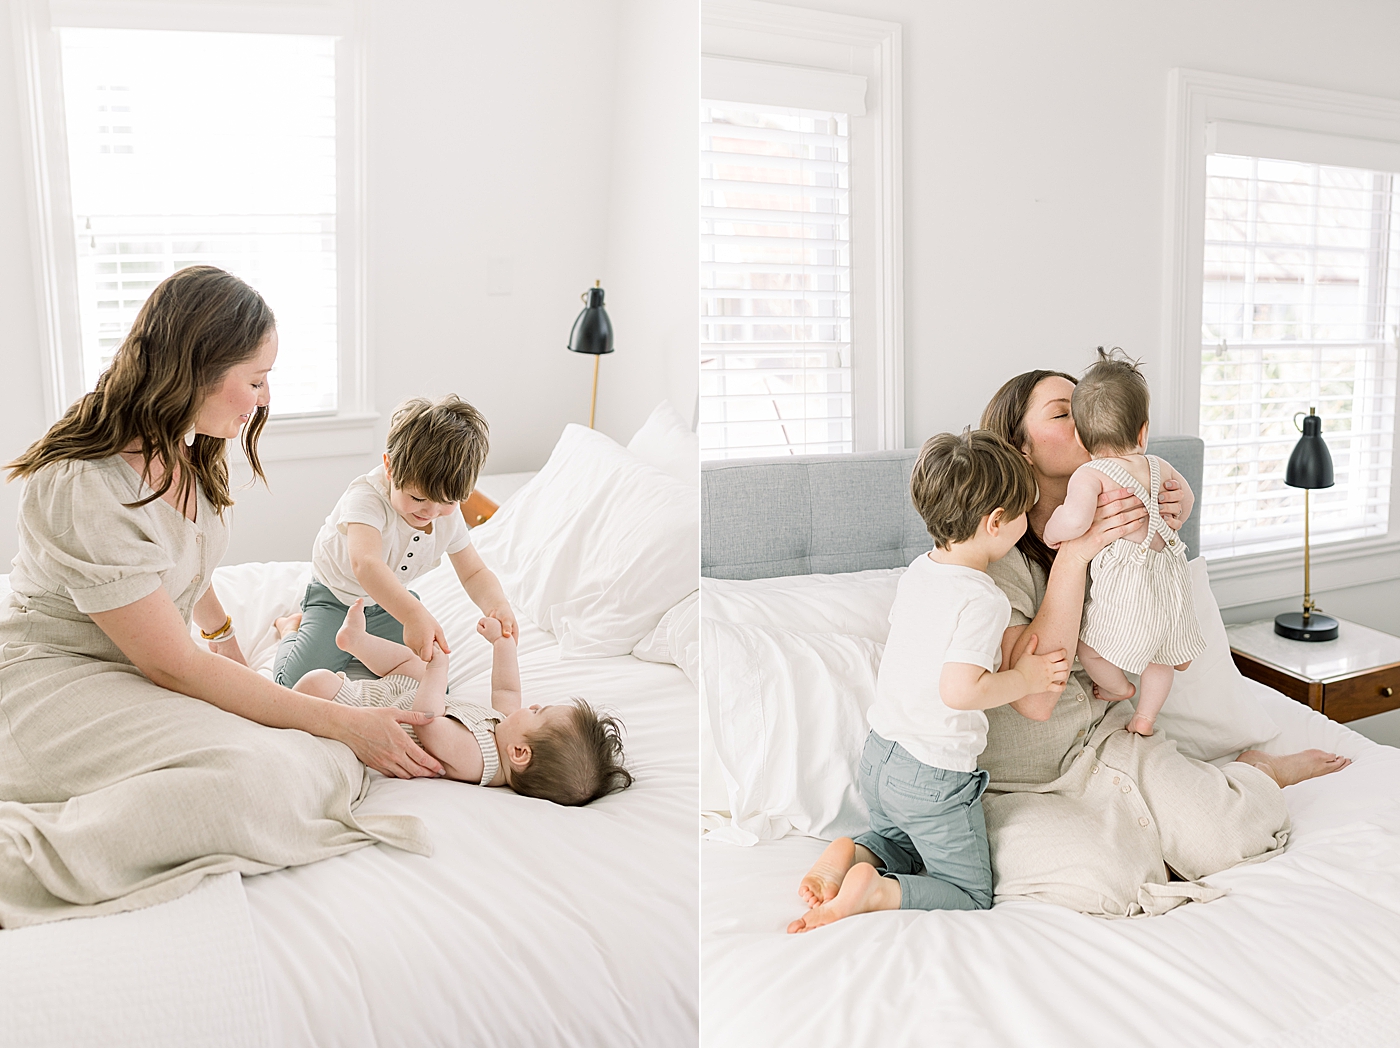 Side by side images of a mother and her two children playing on a clean, white bed | Image by Caitlyn Motycka 